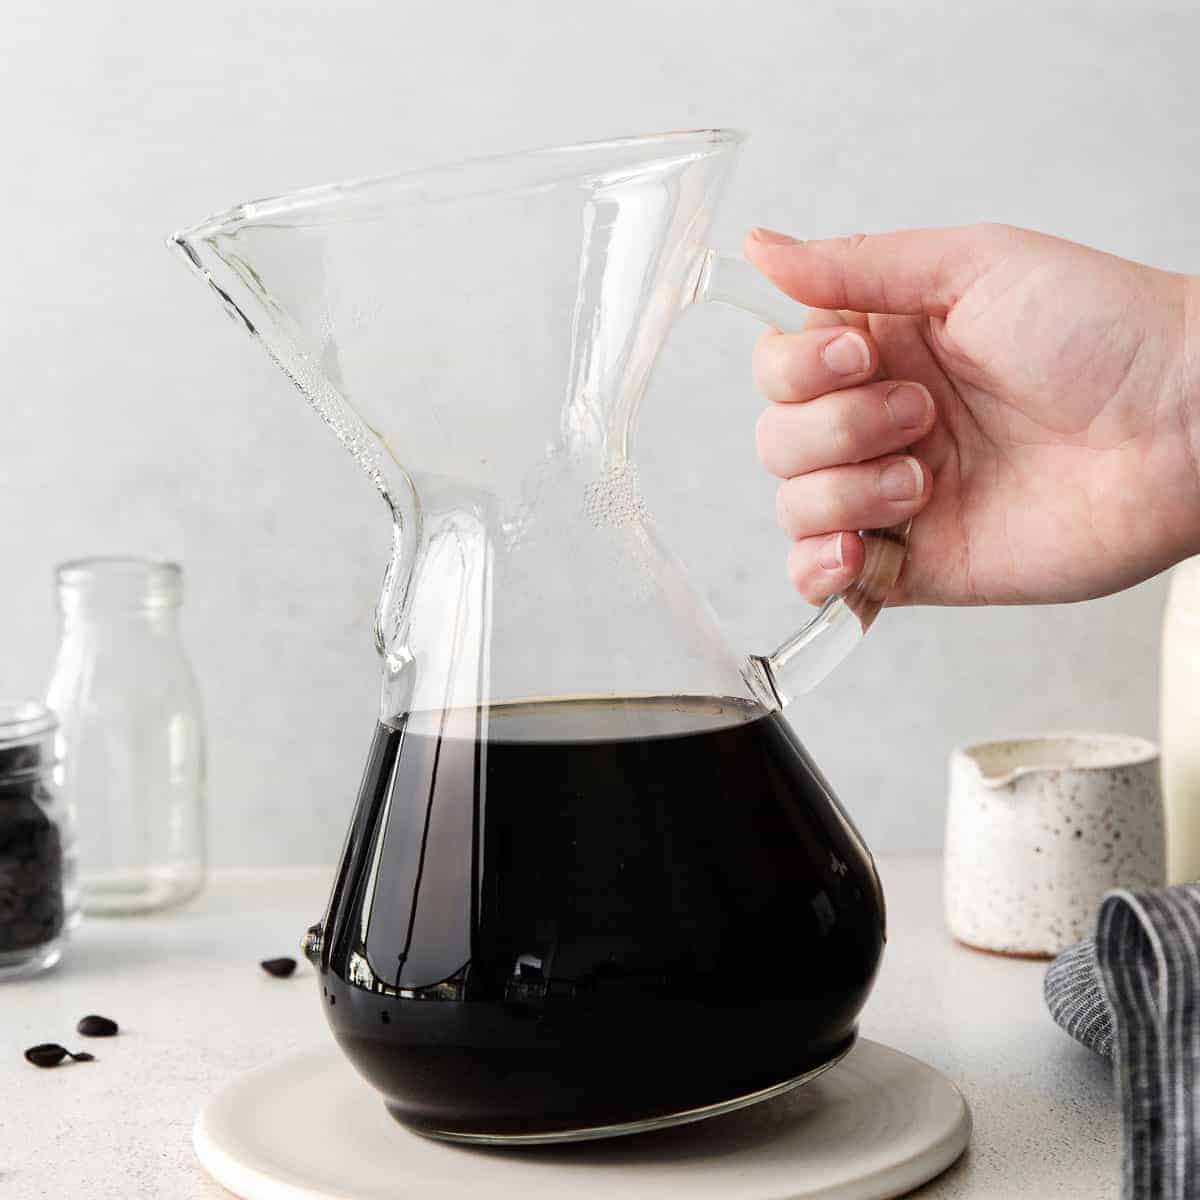 https://fitfoodiefinds.com/wp-content/uploads/2021/10/chemex-10-1.jpg